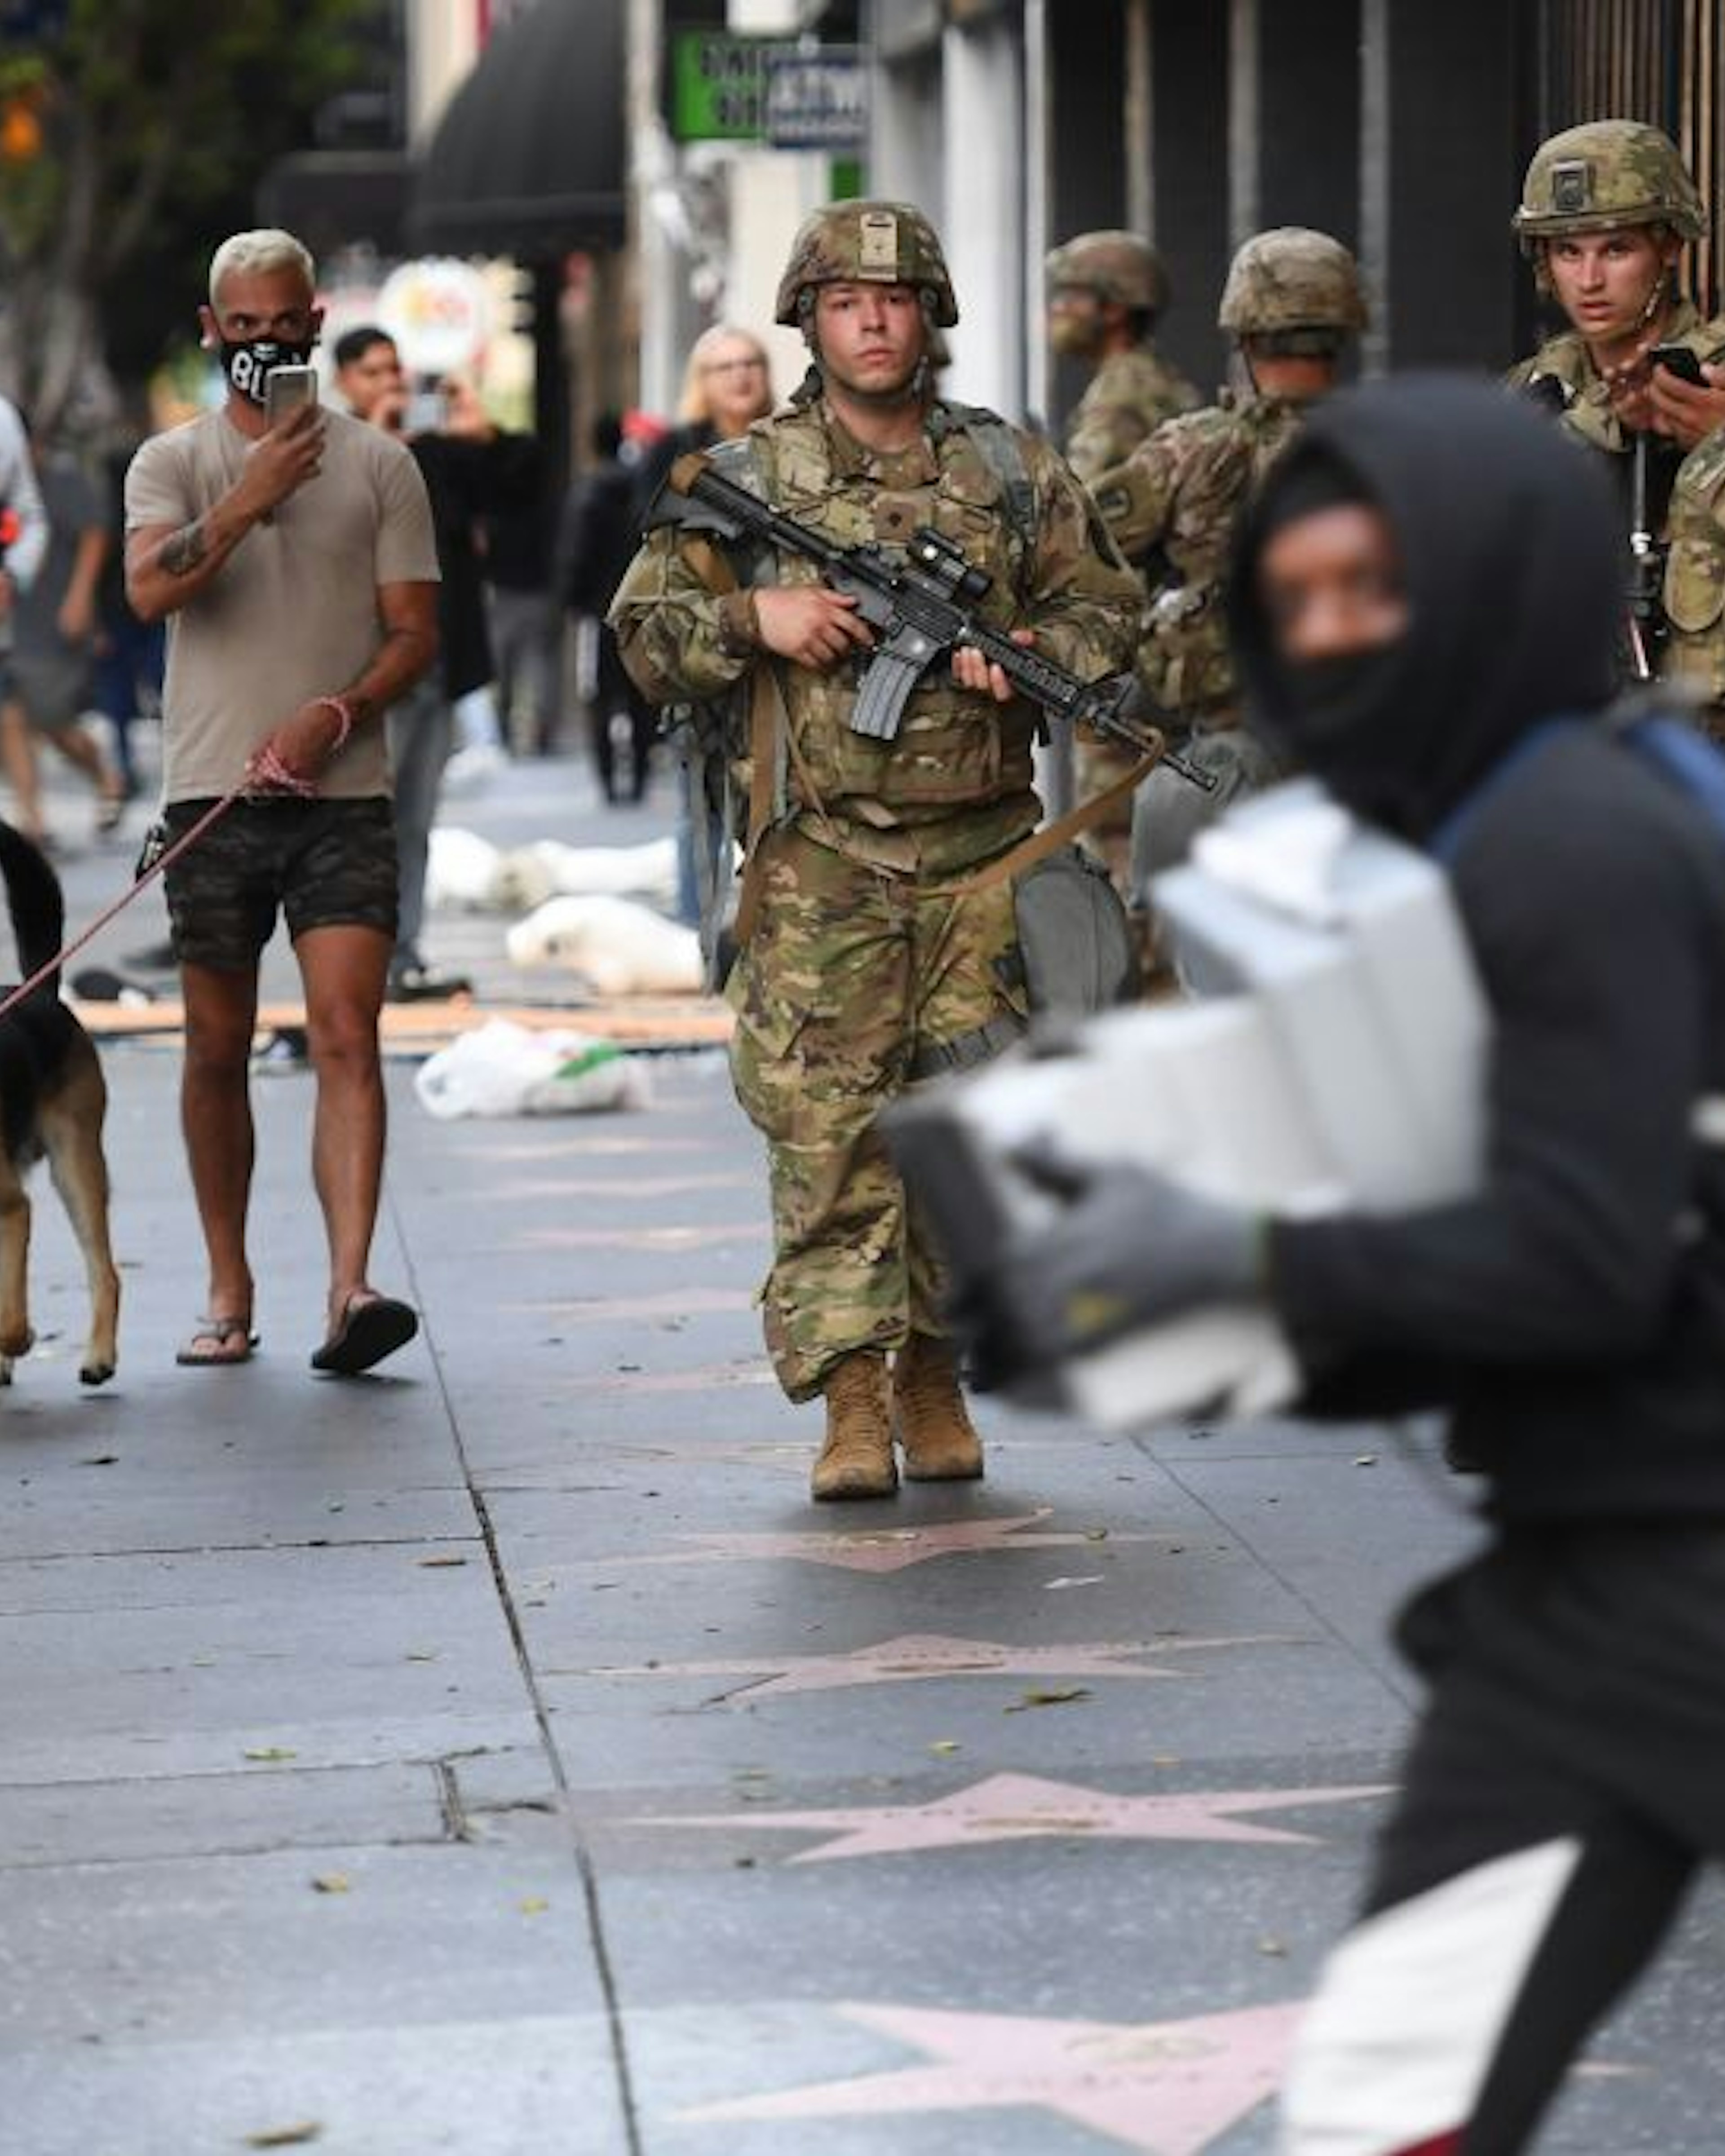 TOPSHOT - A suspected looter carrying boxes of shoes run past National Guard soldiers in Hollywood, California, June 1, 2020, after a demonstration over the death of George Floyd. - Major US cities -- convulsed by protests, clashes with police and looting since the death in Minneapolis police custody of George Floyd a week ago -- braced Monday for another night of unrest. More than 40 cities have imposed curfews after consecutive nights of tension that included looting and the trashing of parked cars. (Photo by Robyn Beck / AFP) (Photo by ROBYN BECK/AFP via Getty Images)